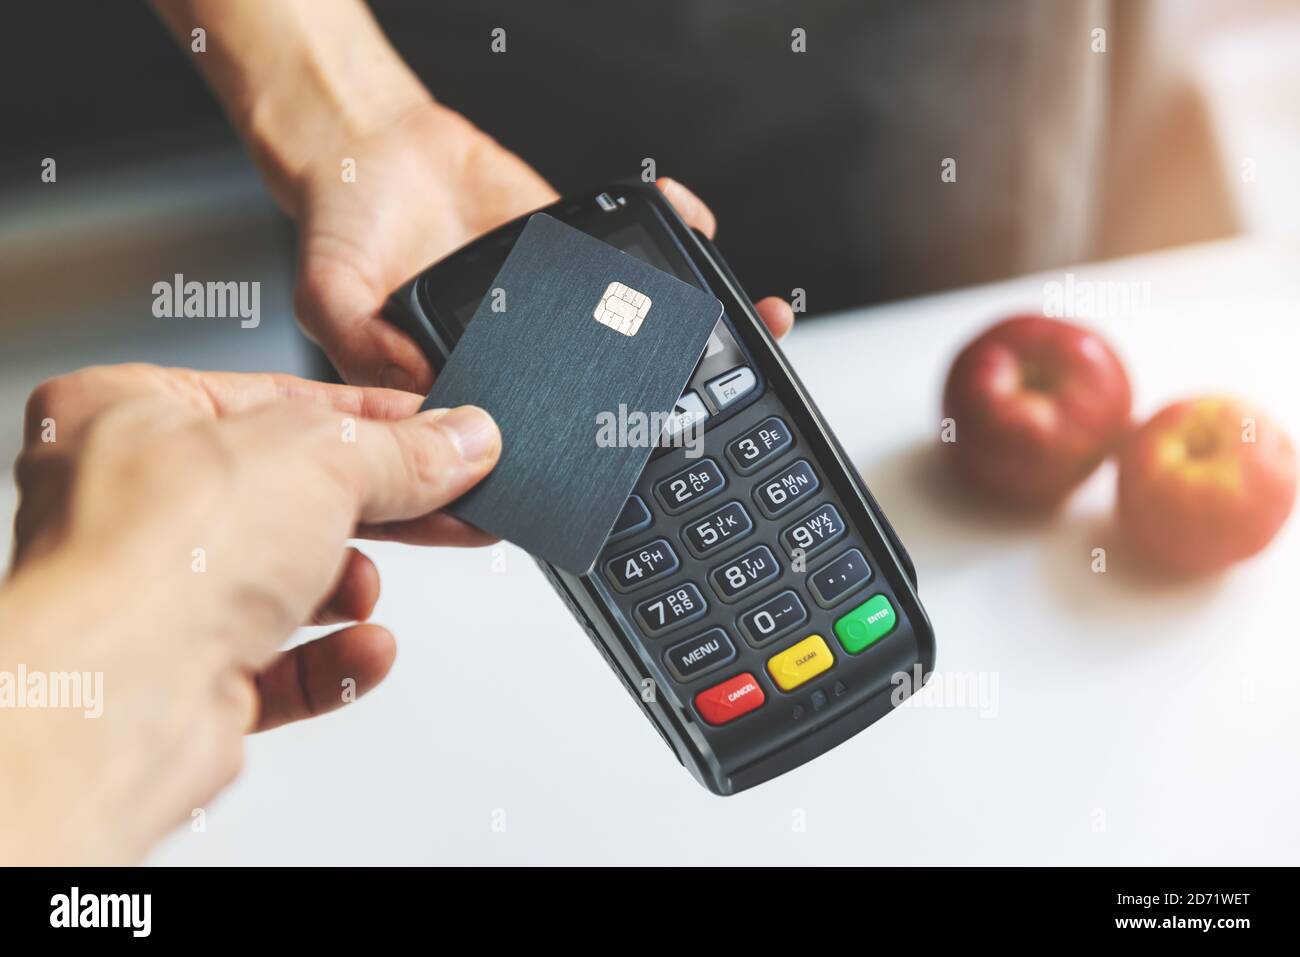 nfc contactless payment by credit card and pos terminal Stock Photo